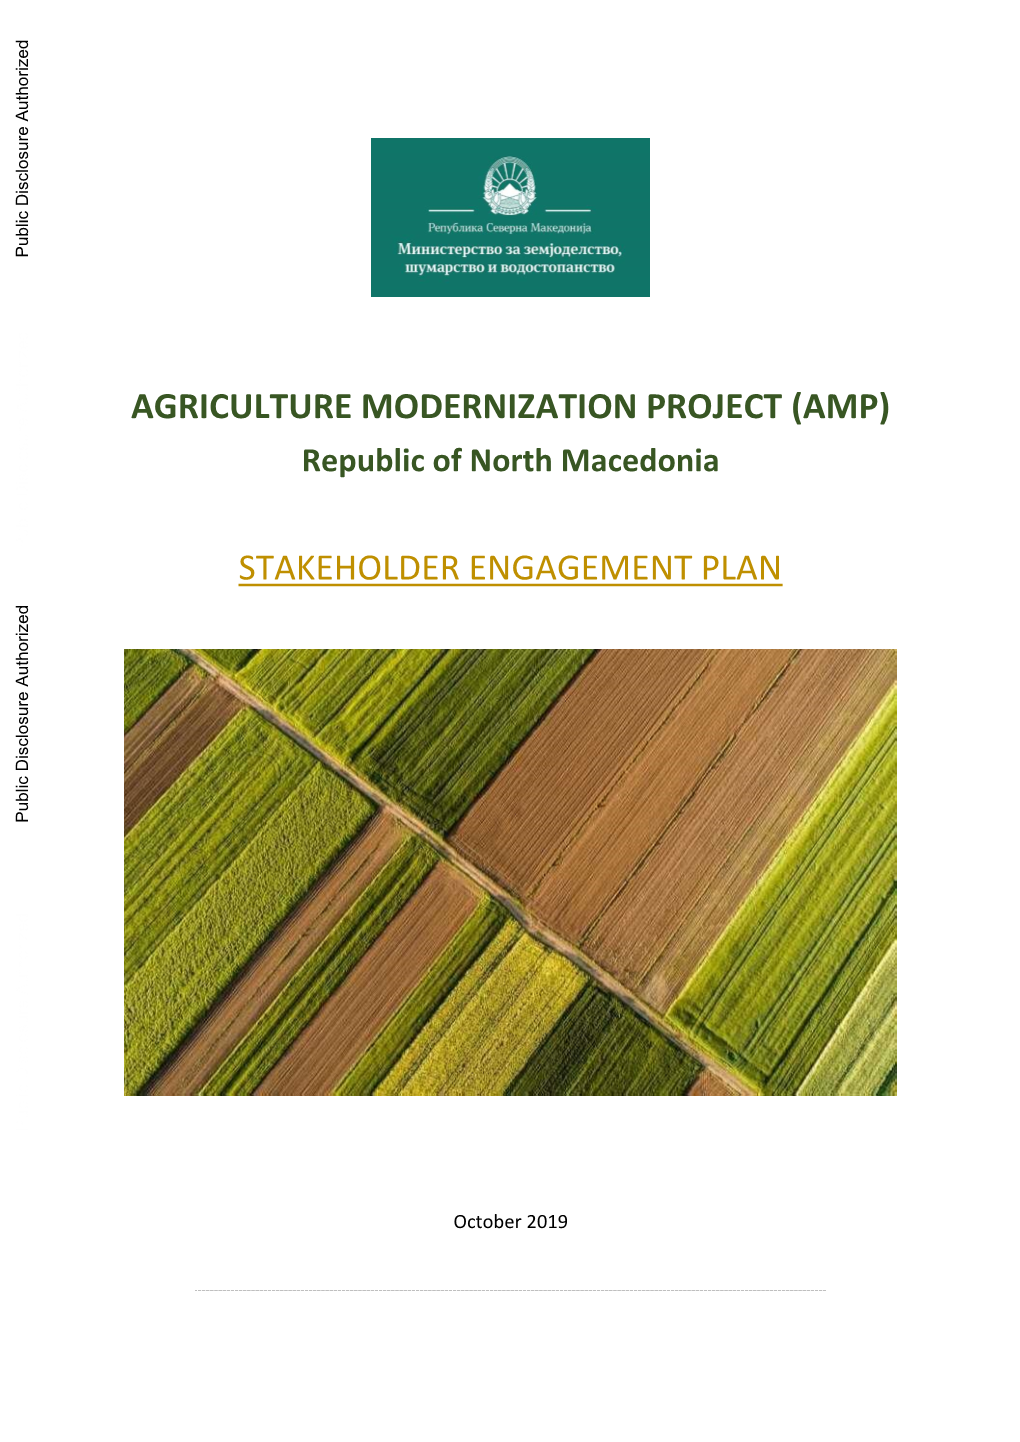 AGRICULTURE MODERNIZATION PROJECT (AMP) Republic of North Macedonia